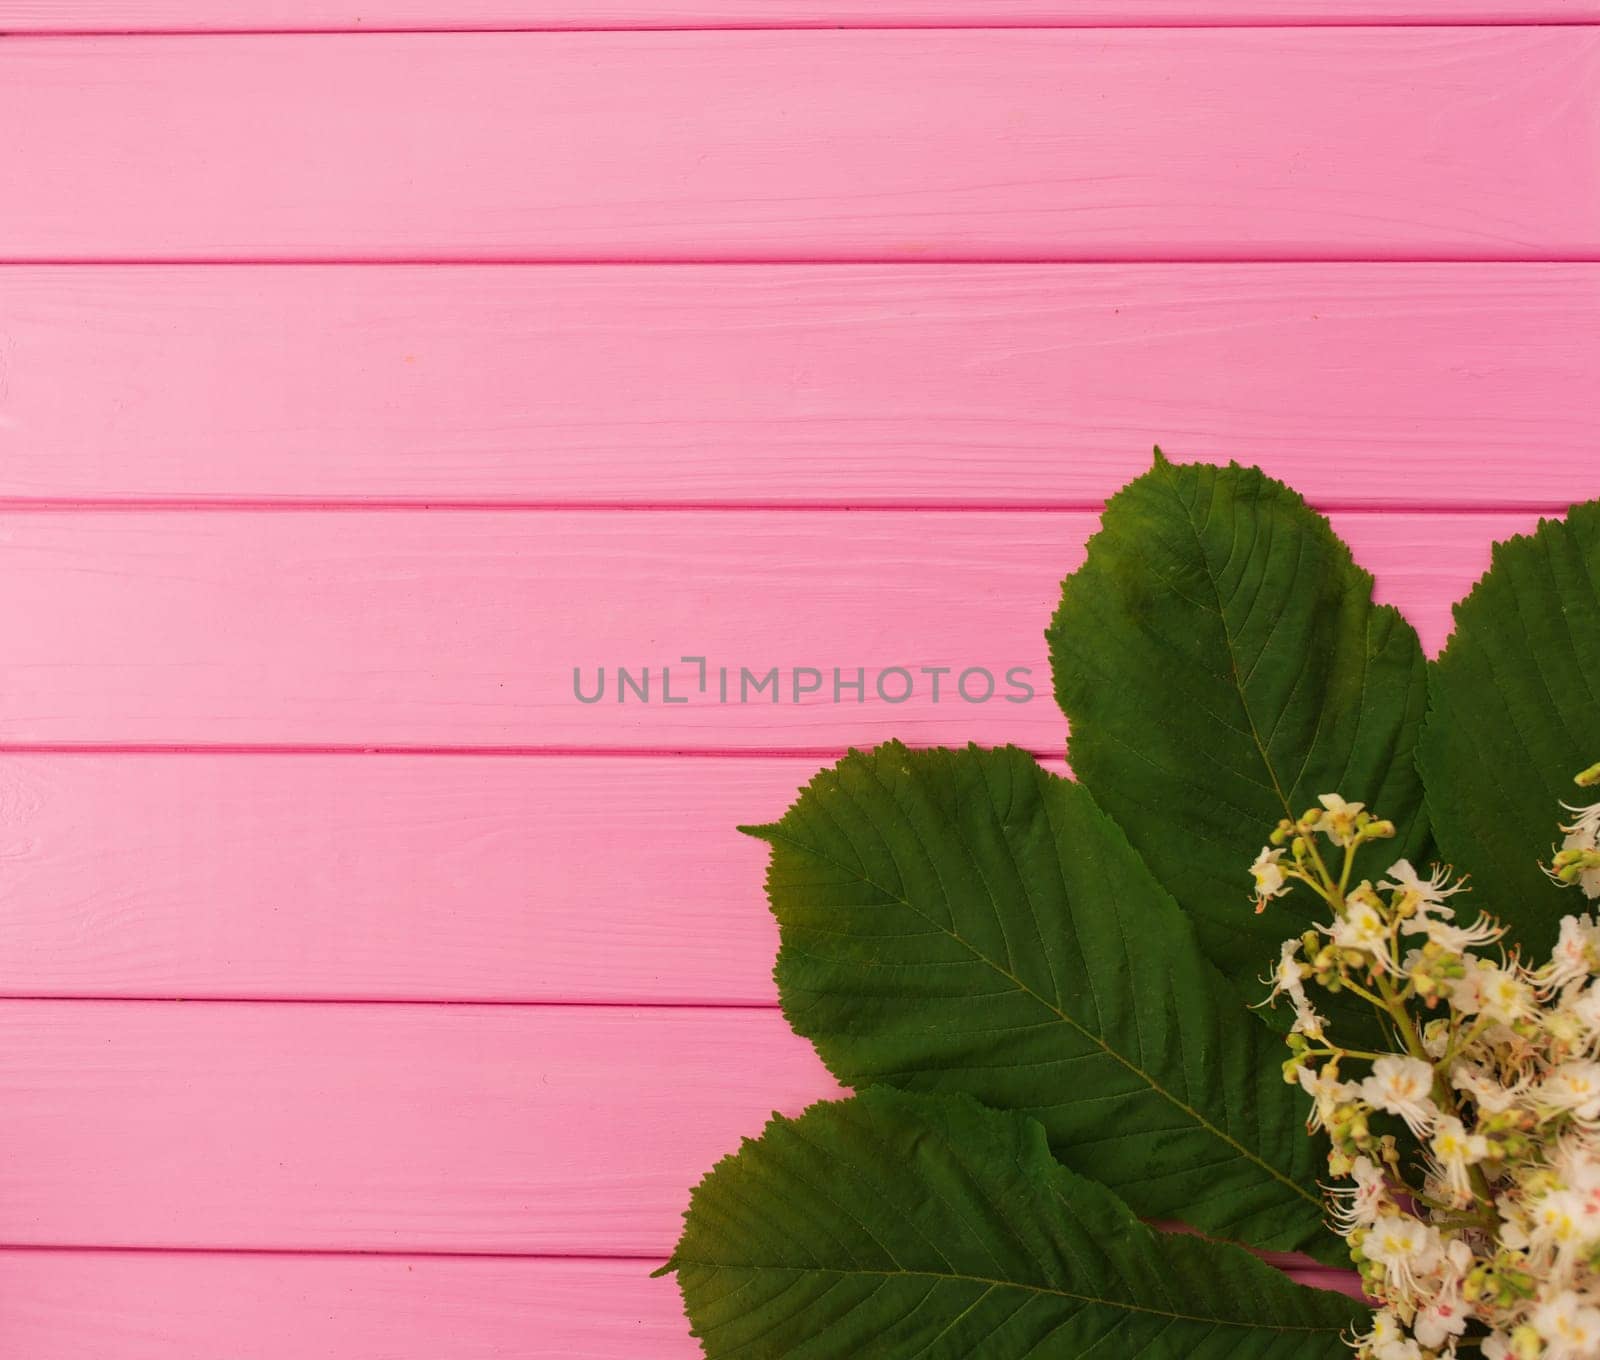 Summer abstract background mockup template free copy space text pattern sample top view above on pink wooden board. blank empty area for inscription. corners flowers borders frames chestnut leaves